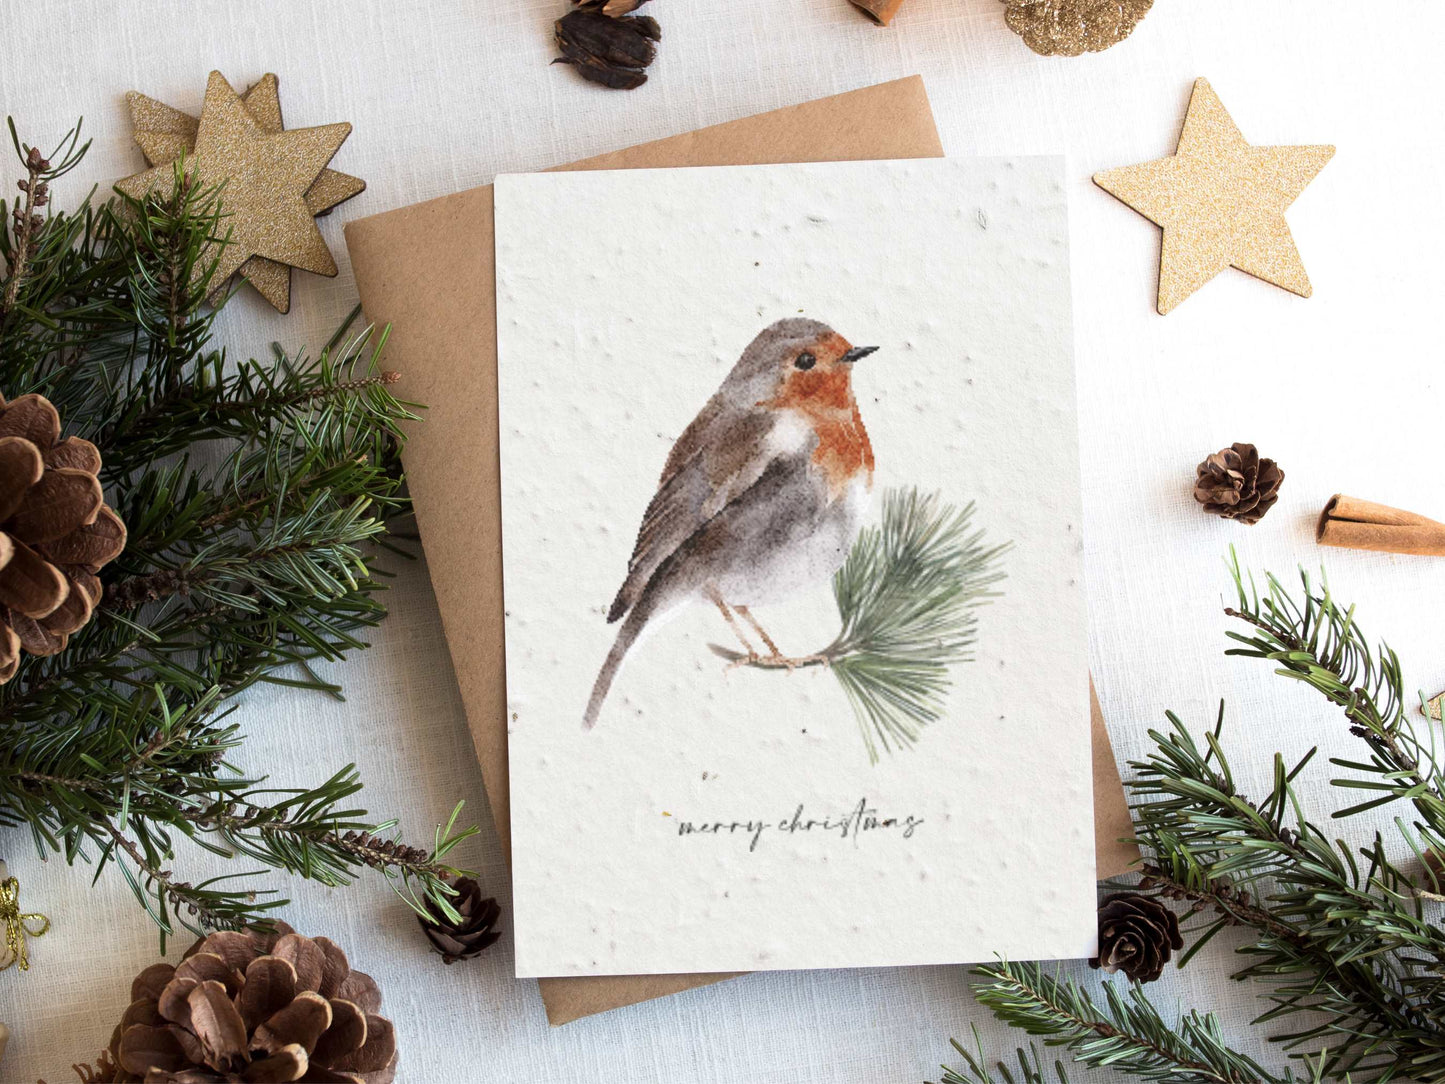 Plantable Seed Paper Christmas Cards 4-Pack - Robins Greeting Card Little Green Paper Shop